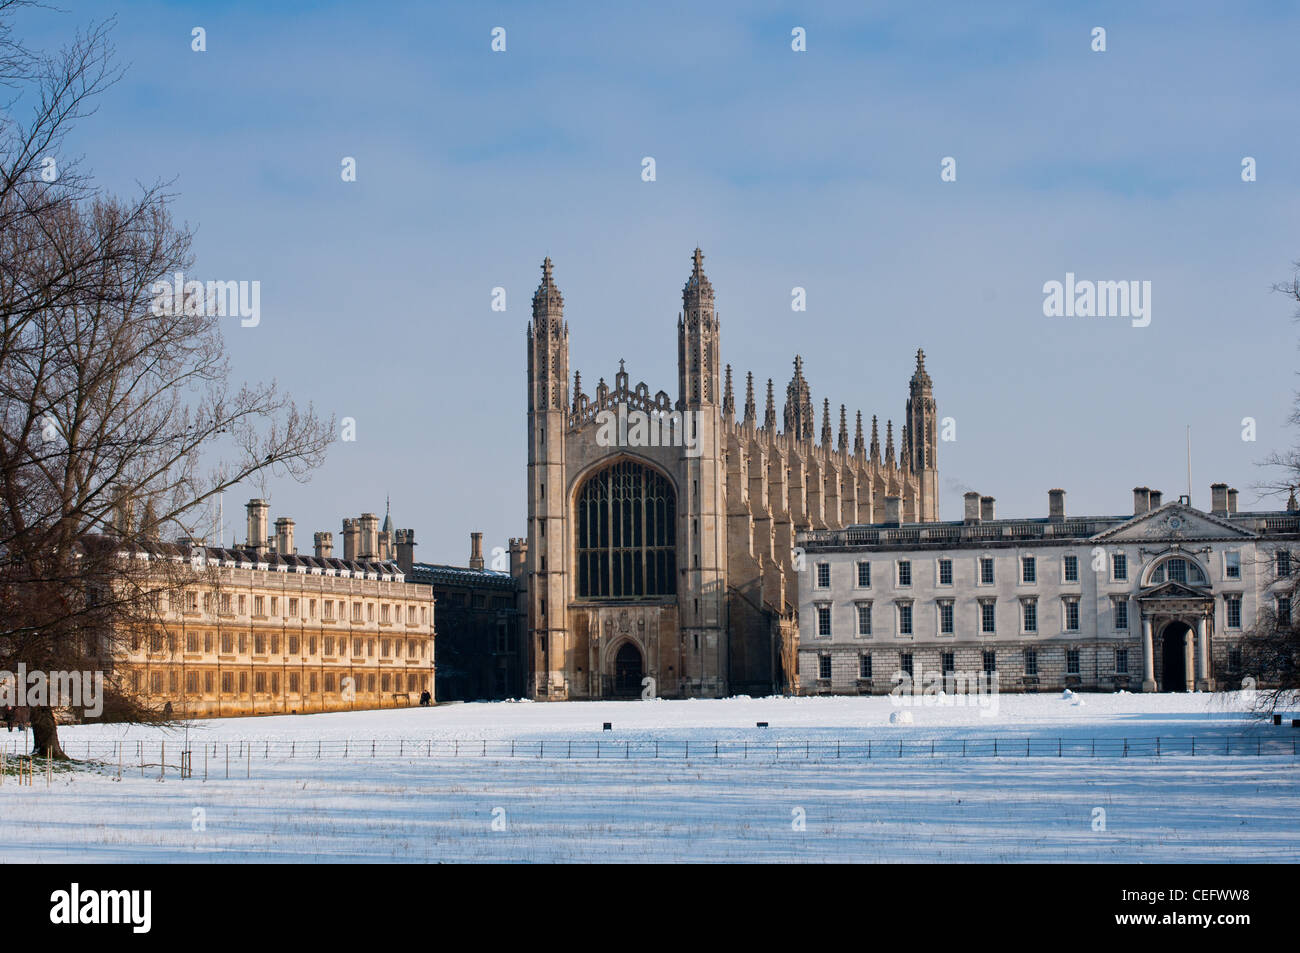 Kings college in winter snow. England. Stock Photo